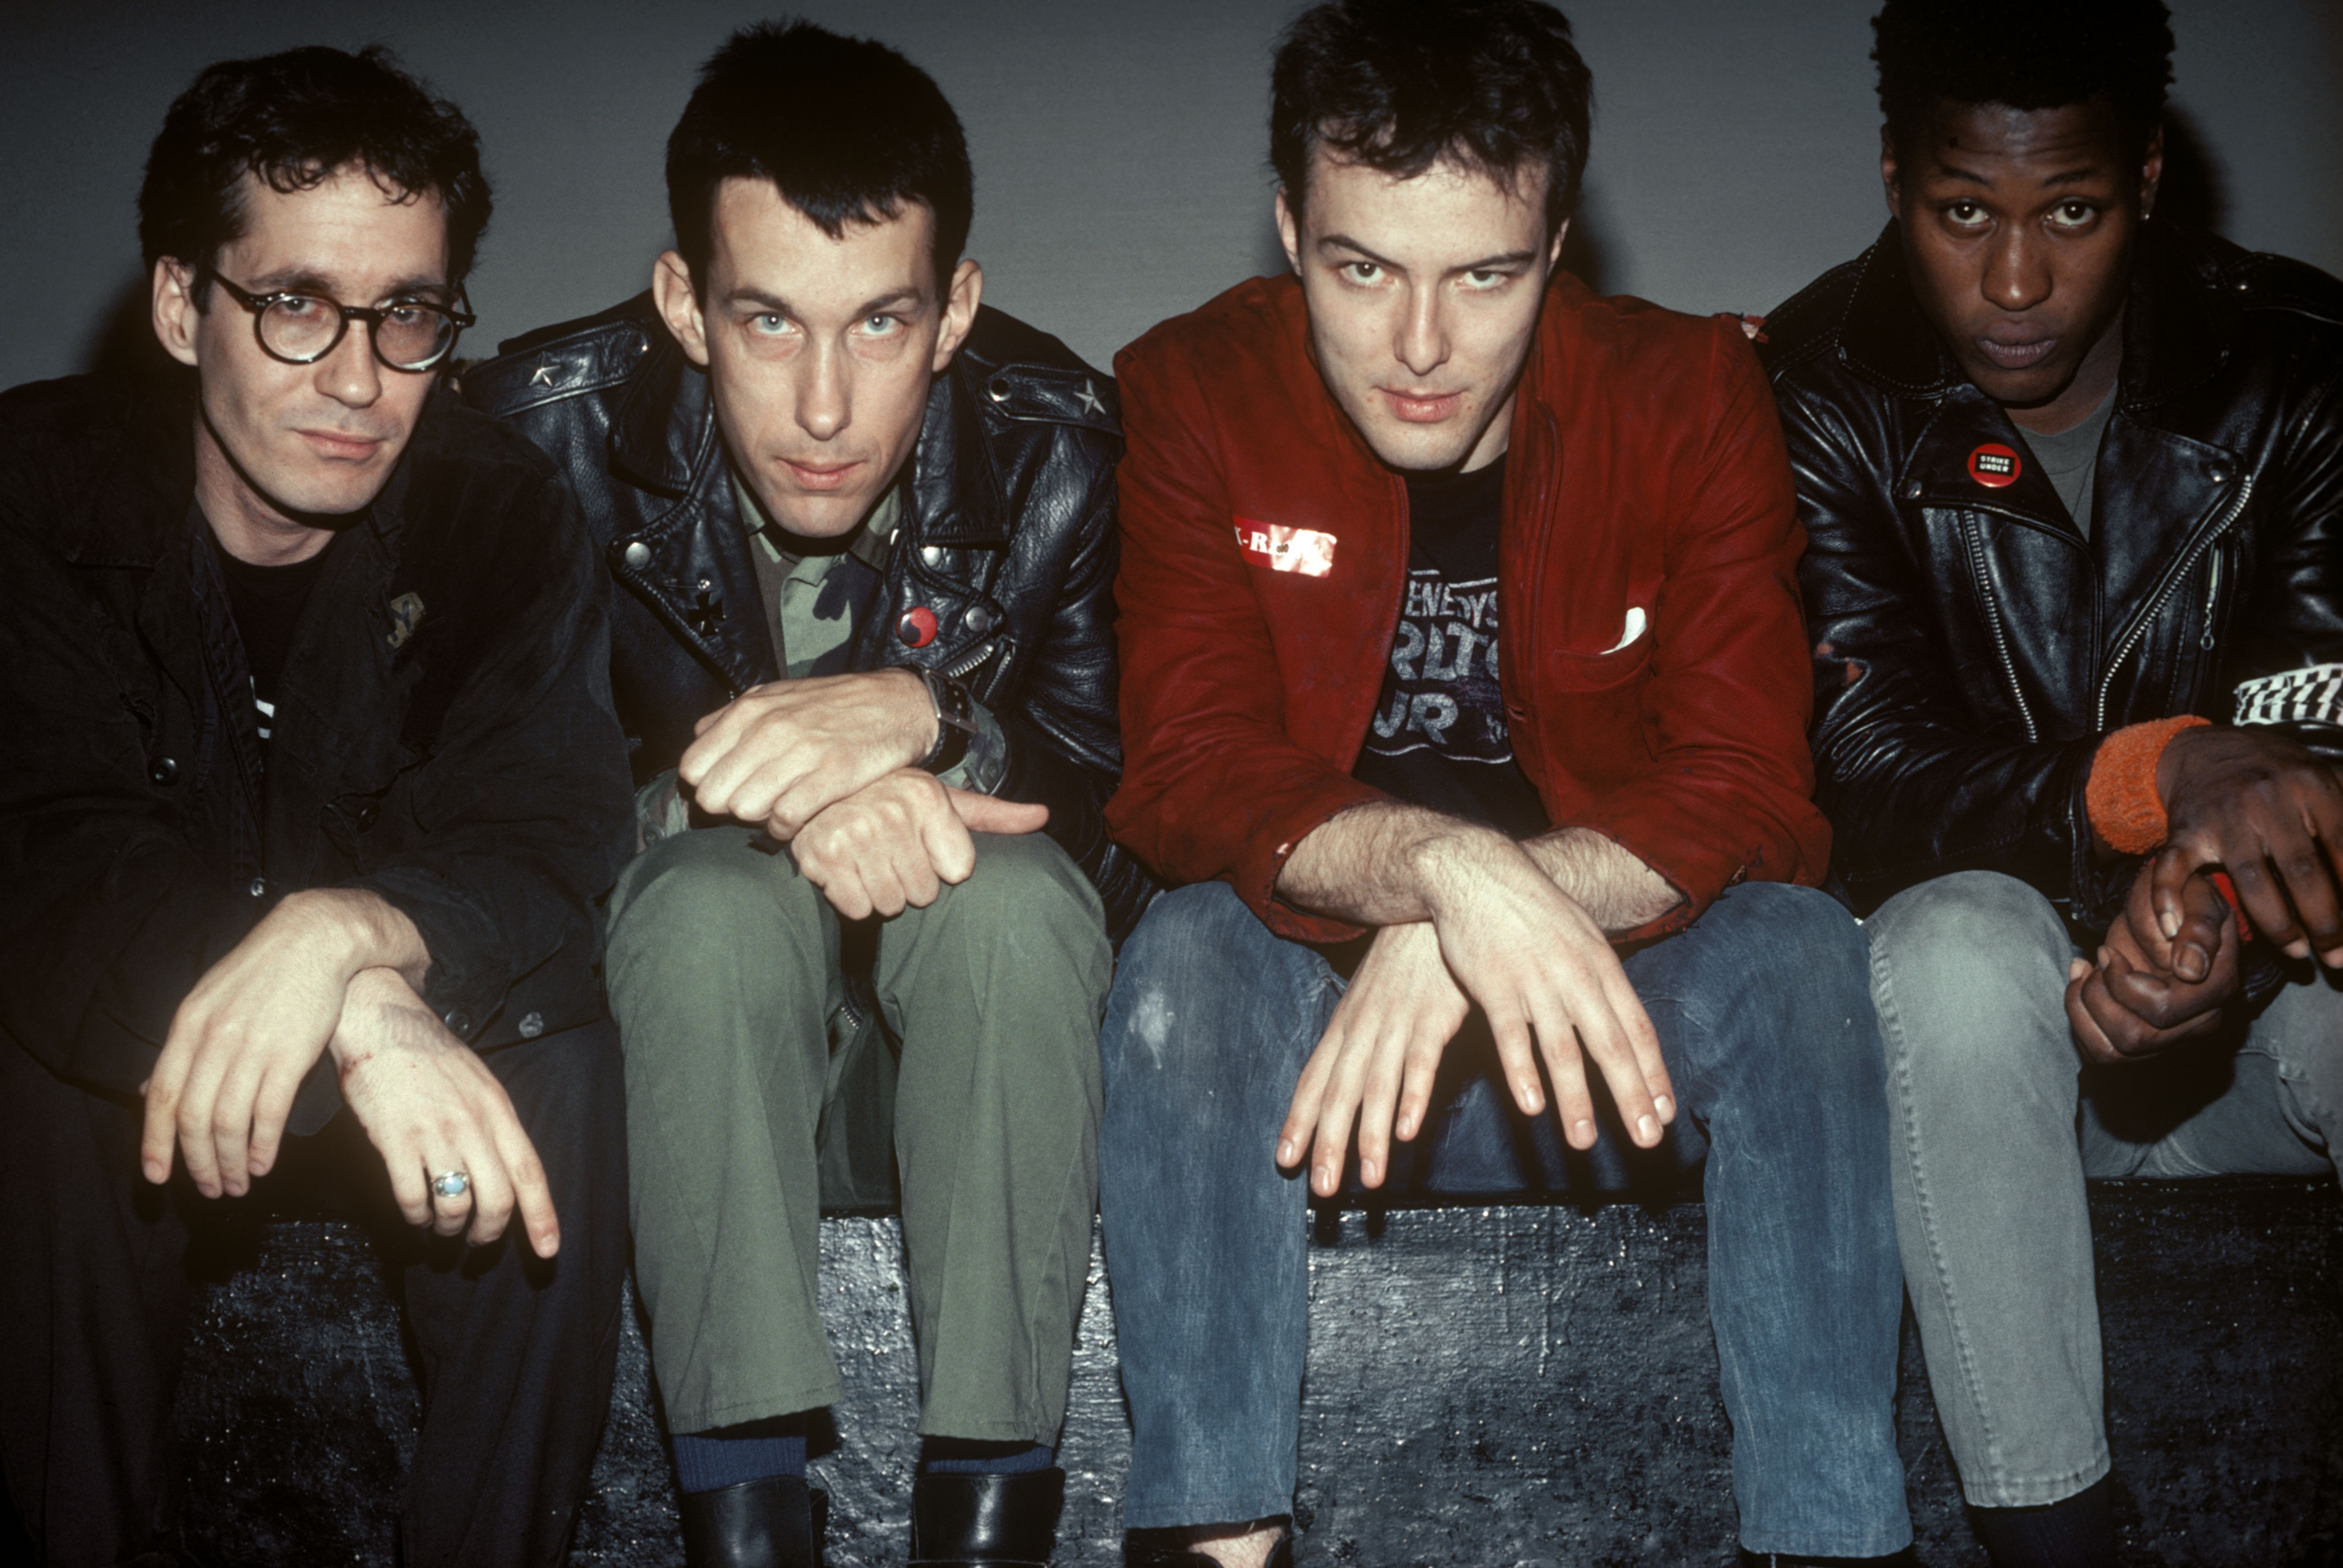 Dead Kennedys: Our 1986 Interview with Jello Biafra